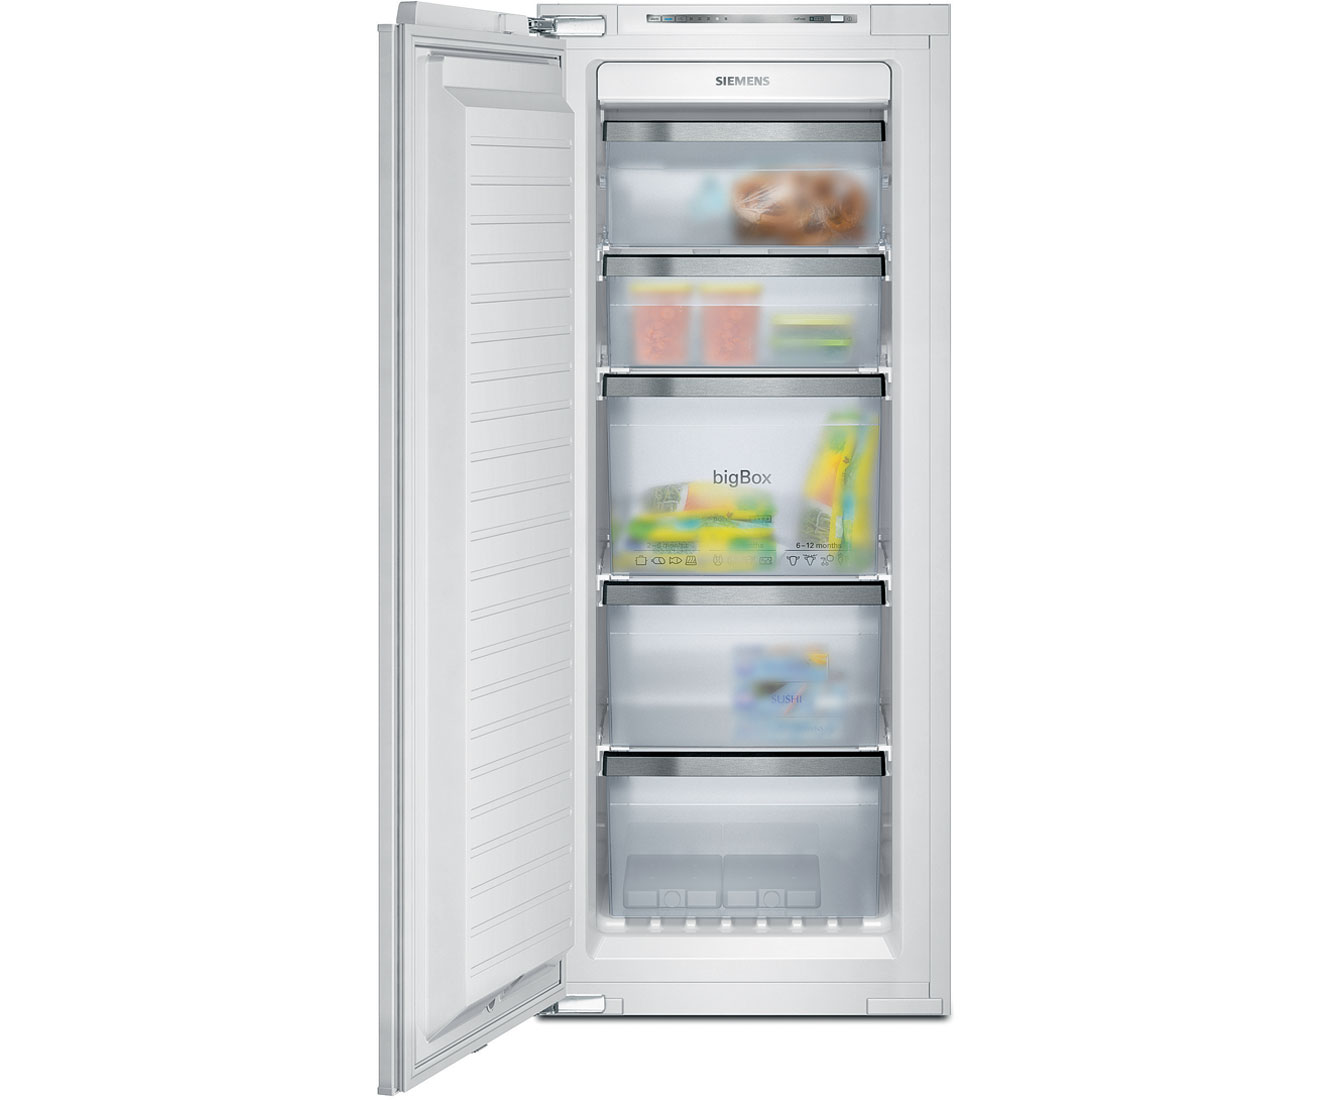 Siemens IQ-500 GI25NP60 Integrated Freezer Frost Free in White